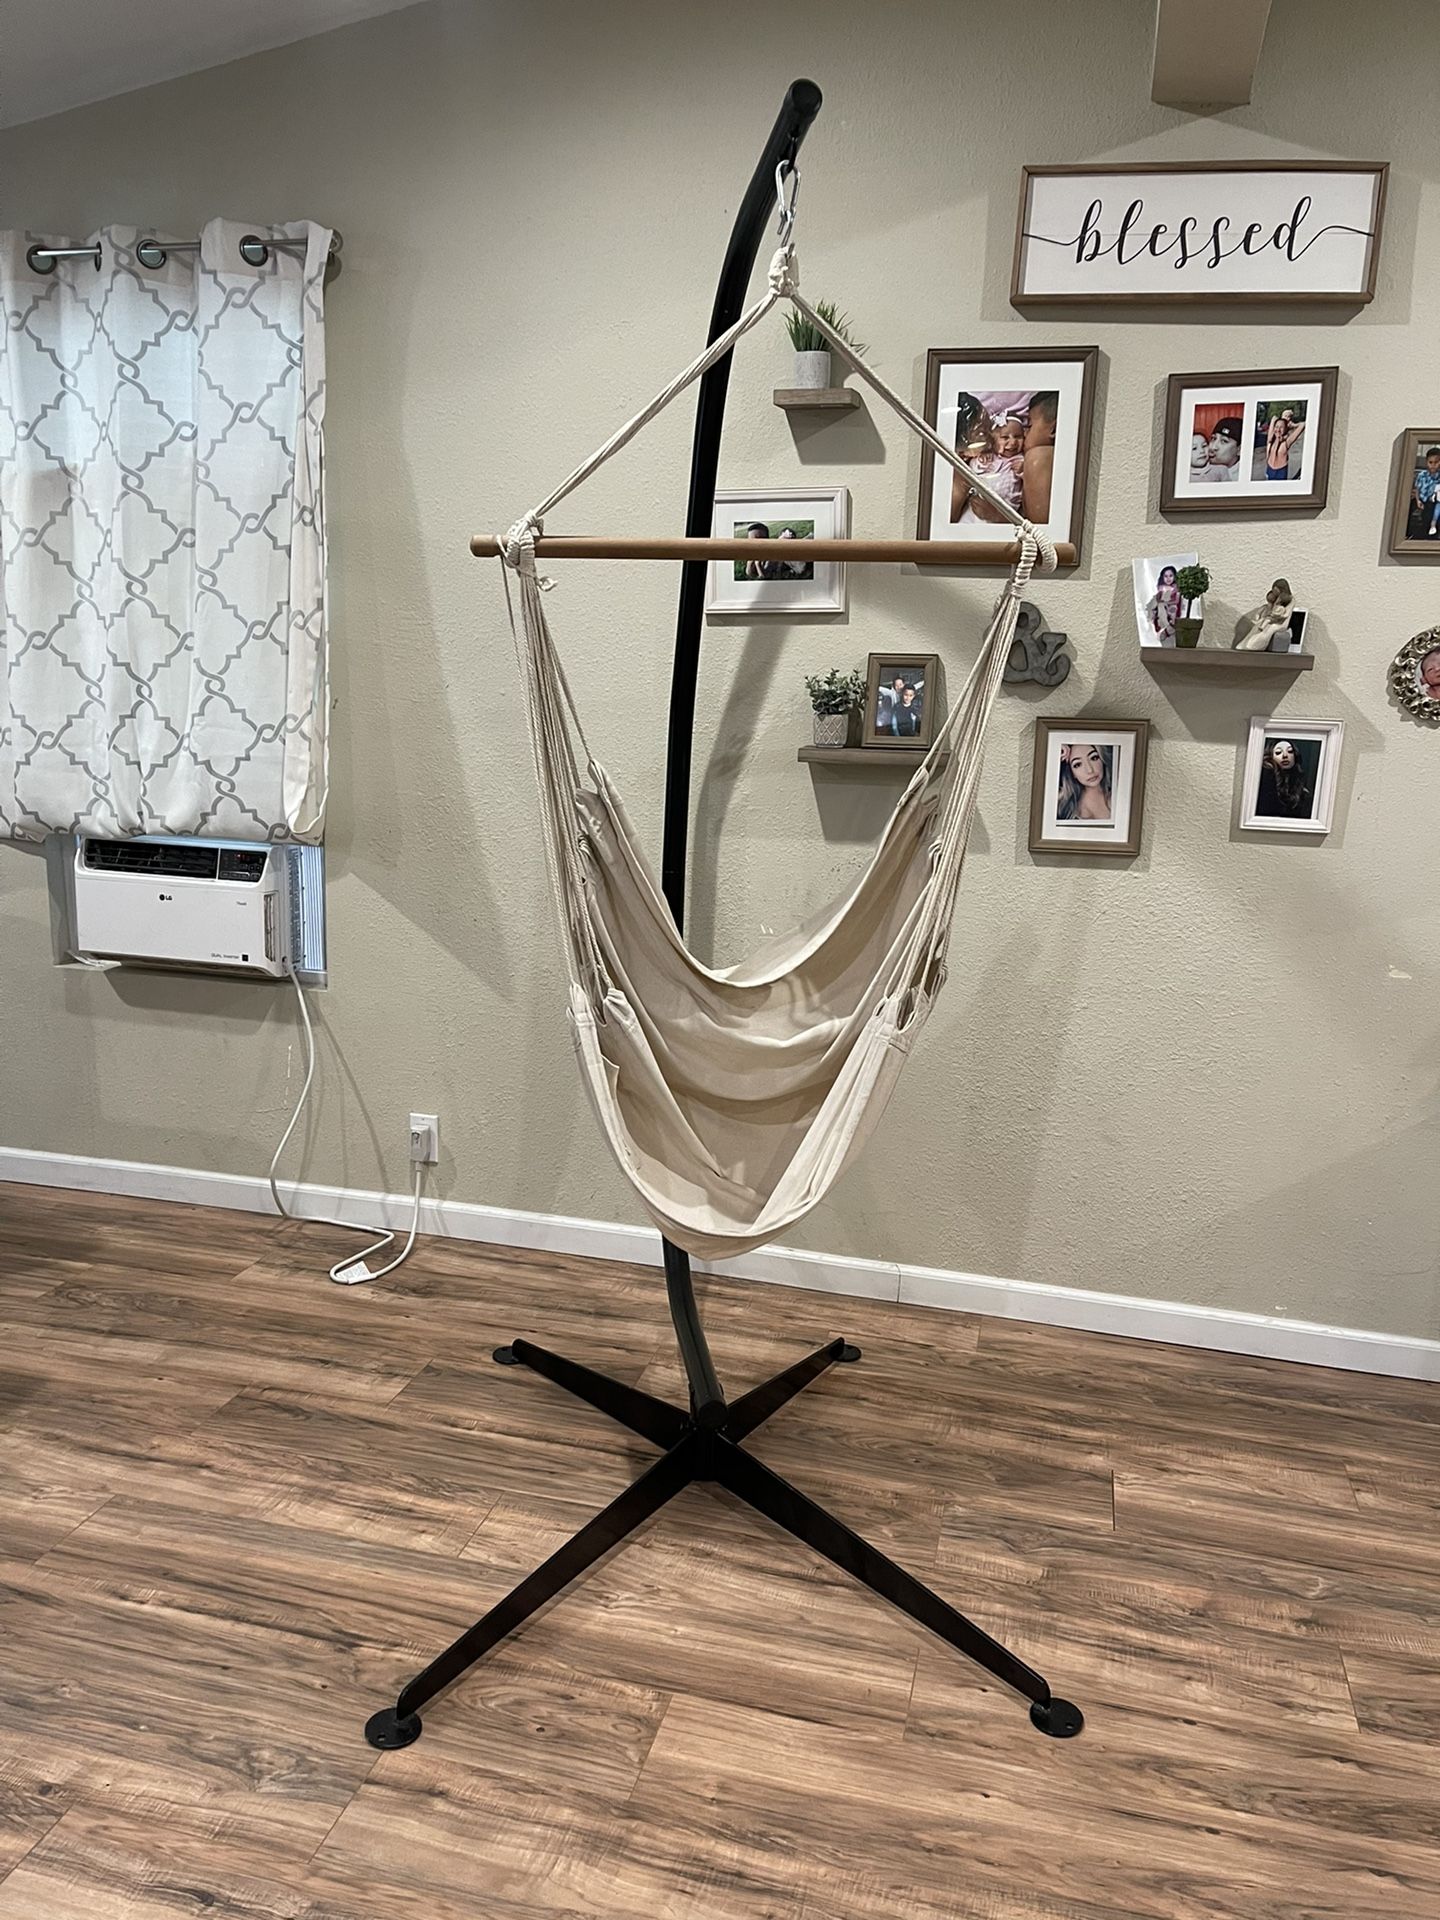 Hanging Chair With Frame